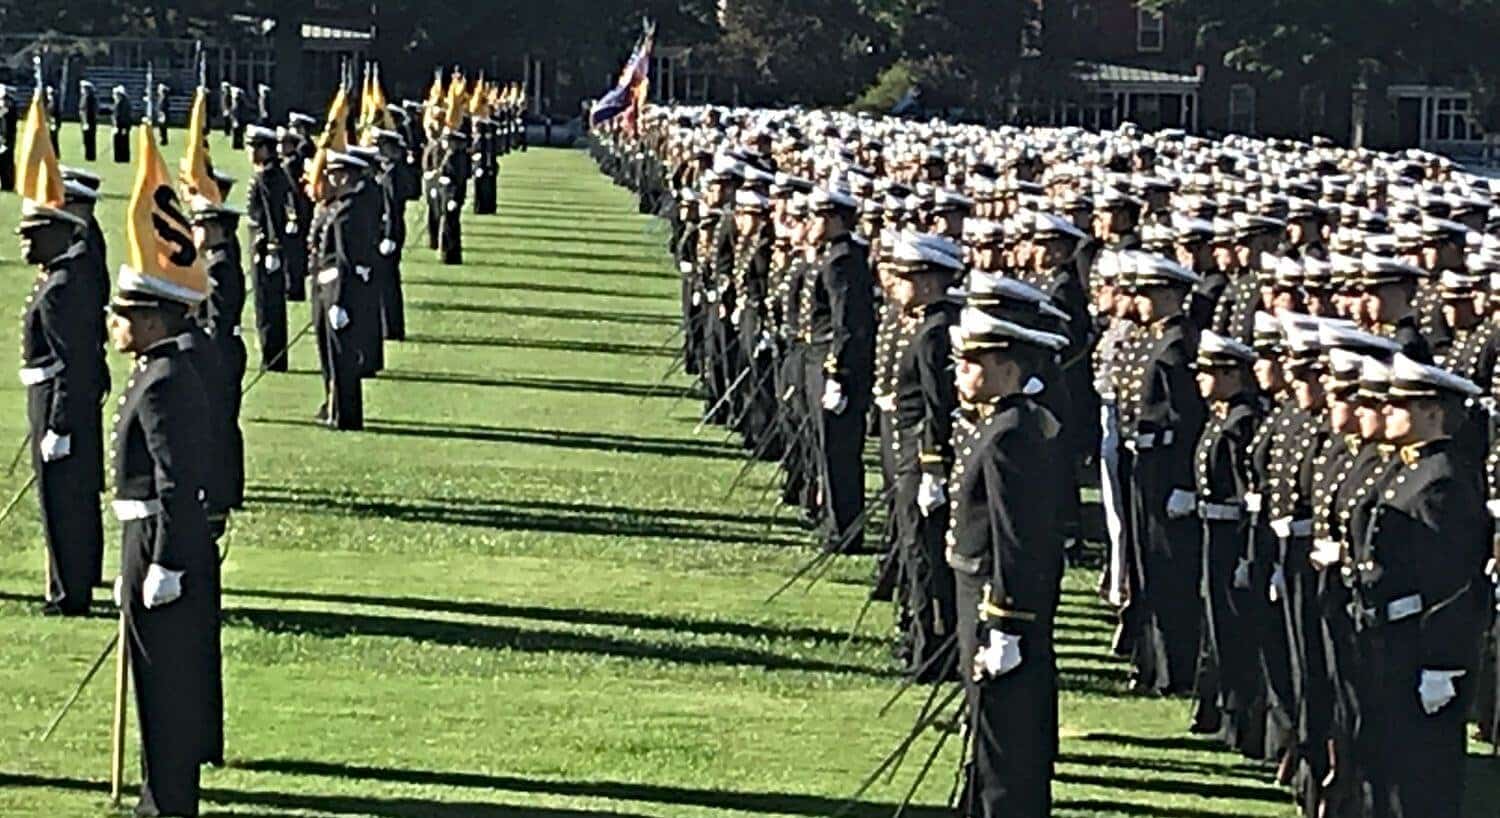 Navy cadets stand at parade rest on a green lawn